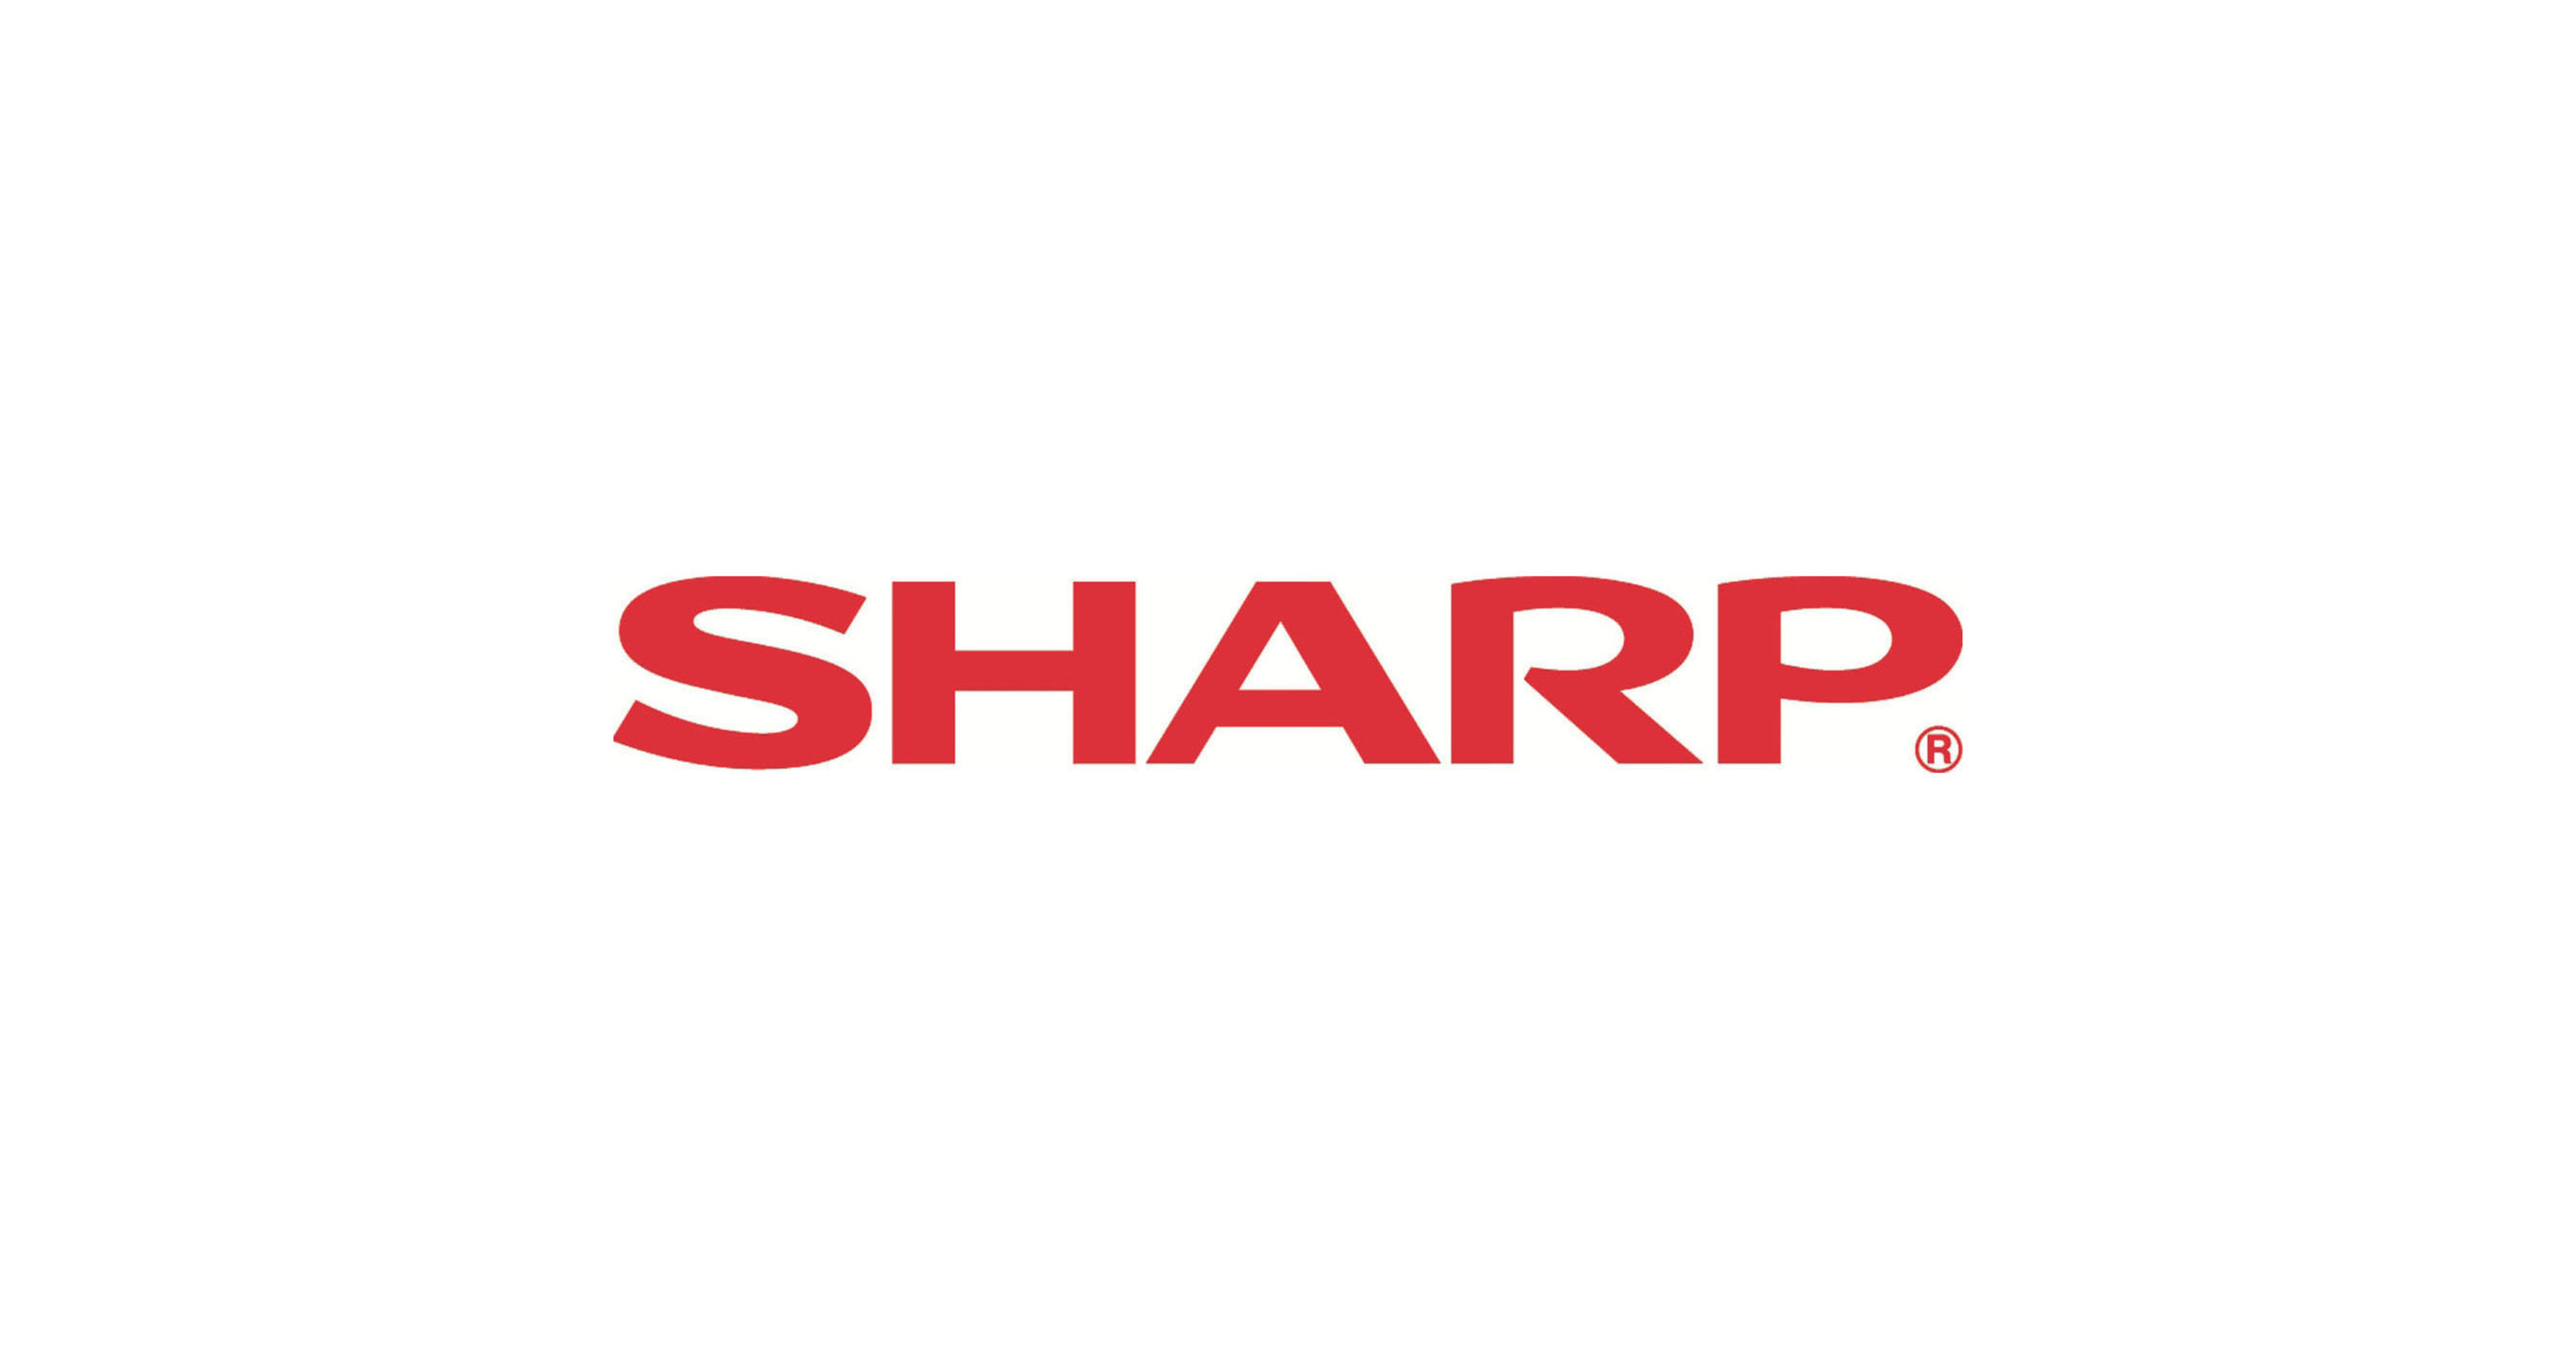 Sharp introduces new M series of laser projectors starting at $1049 (photo)